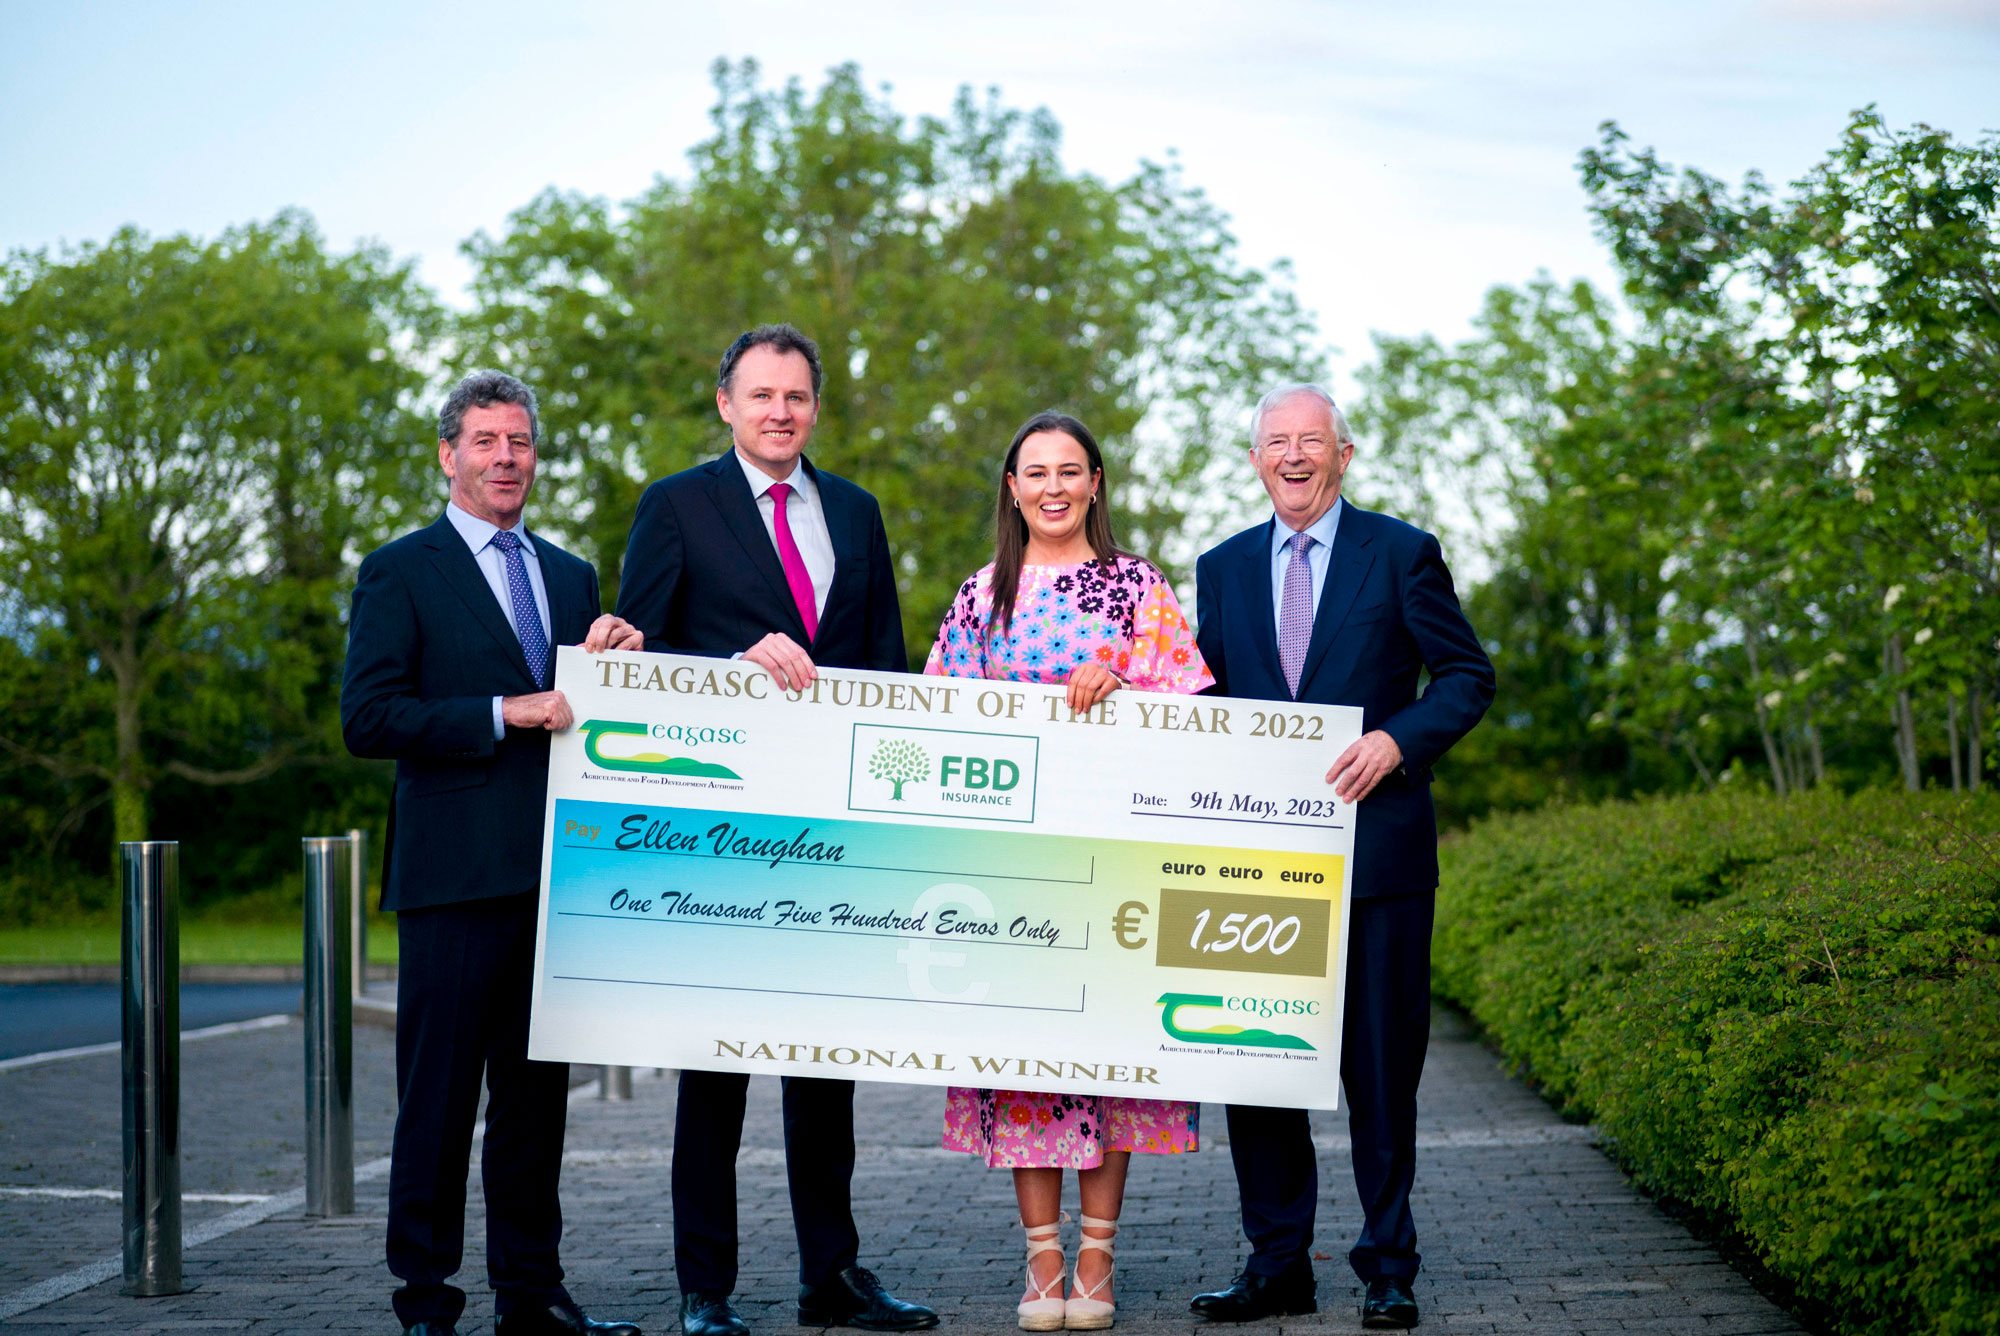 Teagasc FBD Student of the Year Awards 2022